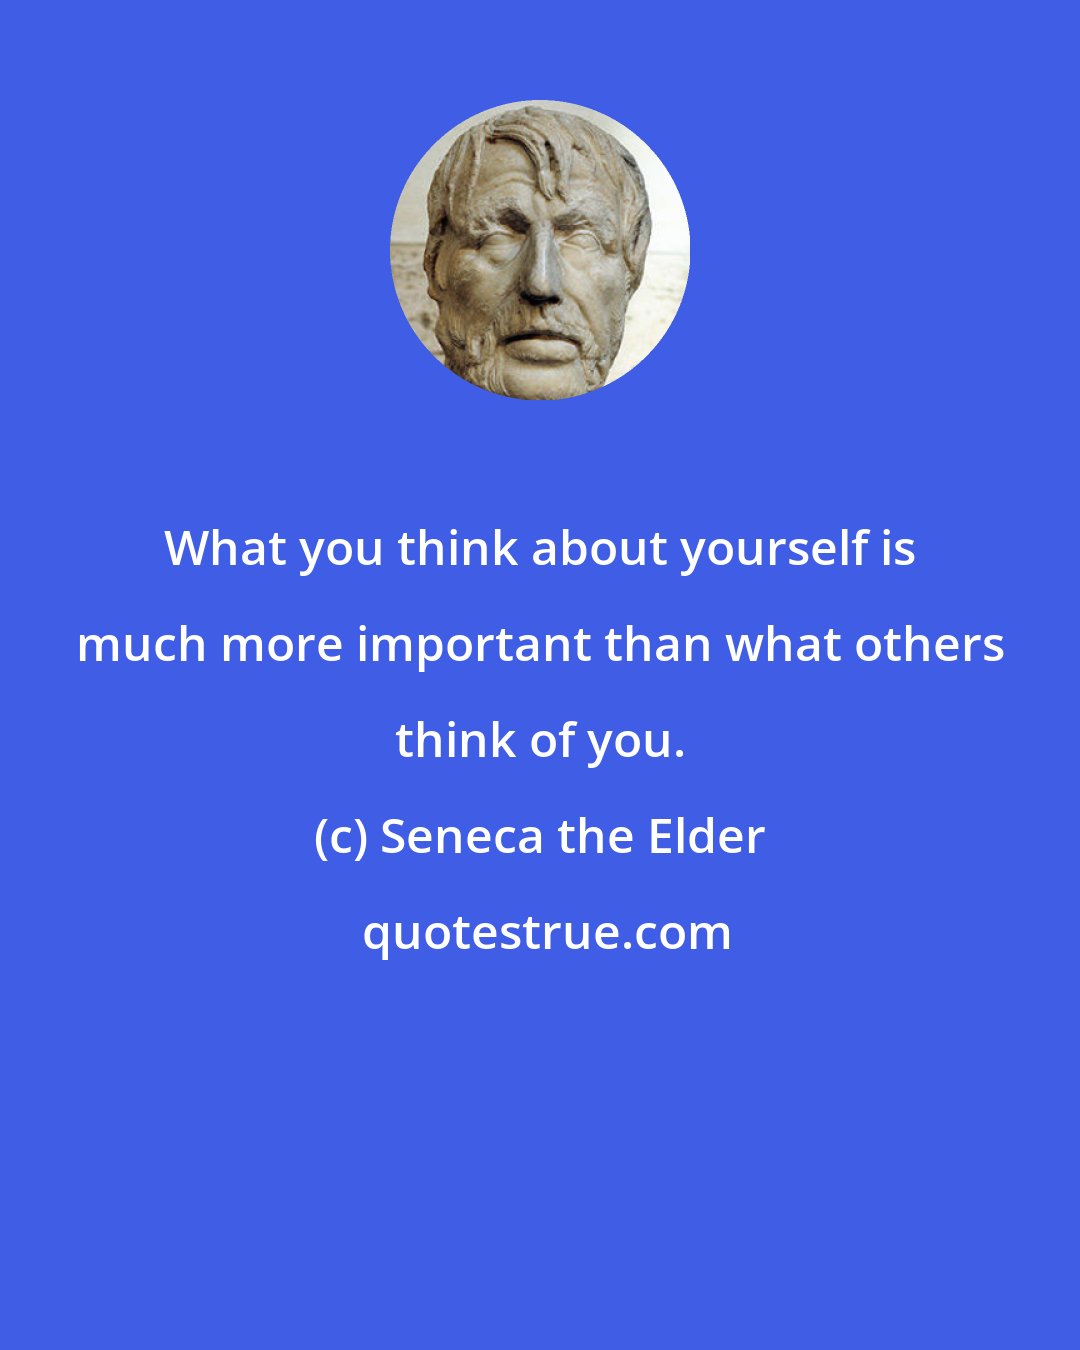 Seneca the Elder: What you think about yourself is much more important than what others think of you.